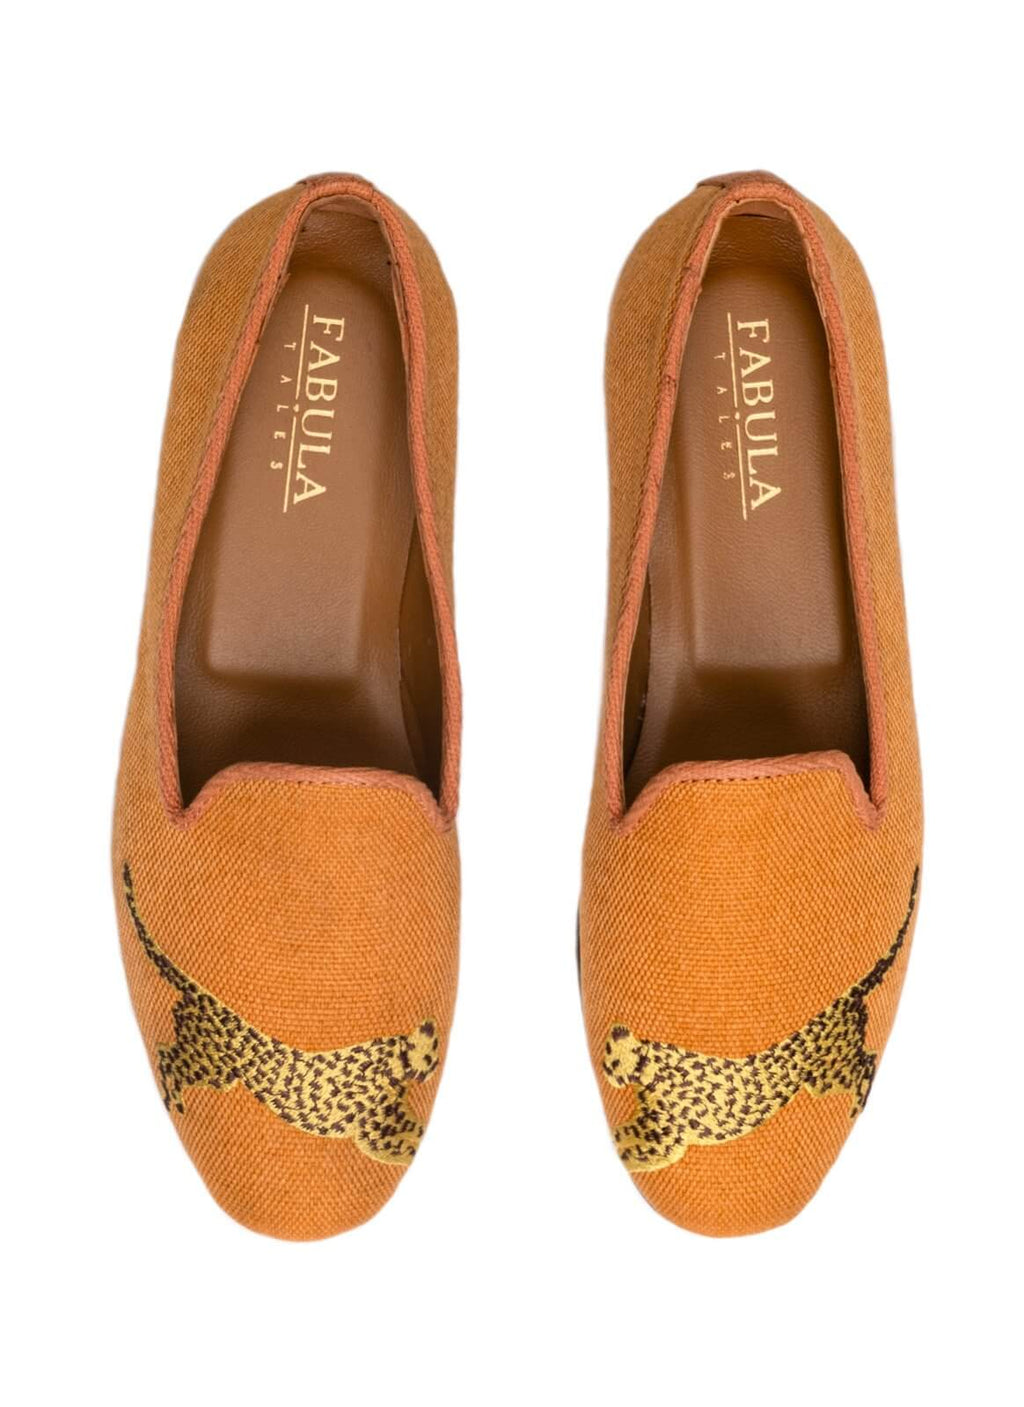 orange linen slippers with orange grosgrain trimming, leopard embroidery on top and nubuck leather sole.